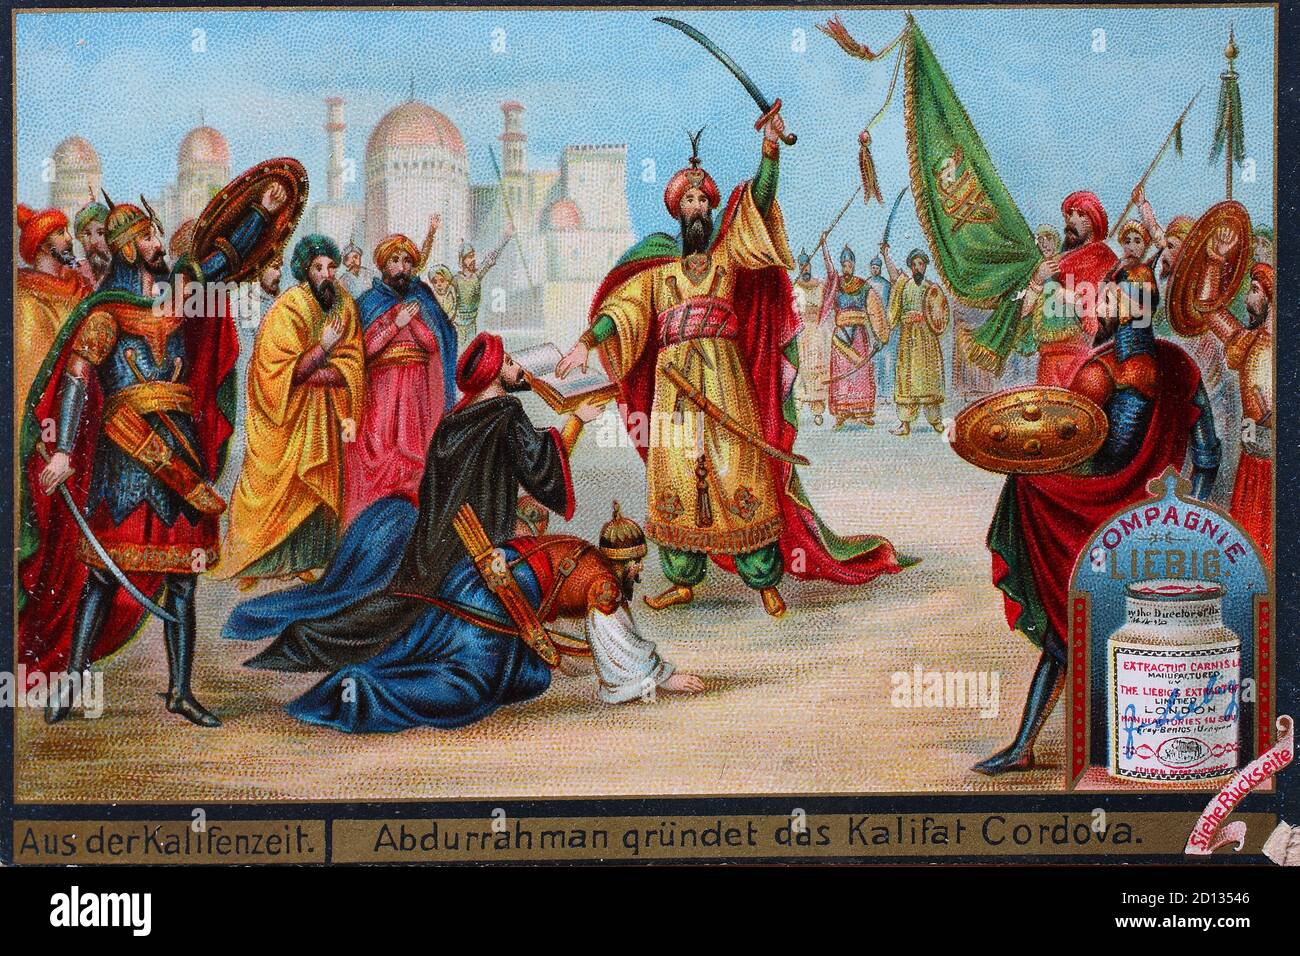 Picture series from the Caliph time, Abdurrahman founded the Caliphate Cordova, Cordoba, Islamic state on the territory of the Iberian Peninsula from 929 to 1031, Spain  /  Bilderserie Aus der Kalifenzeit, Abdurrahman gründet das Kalifat Cordova, islamischer Staat auf dem Gebiet der Iberischen Halbinsel von 929 bis 1031, Spanien, digital improved reproduction of a collectible image from the Liebig company, estimated from 1900, pd  /  digital verbesserte Reproduktion eines Sammelbildes von ca 1900, gemeinfrei Stock Photo